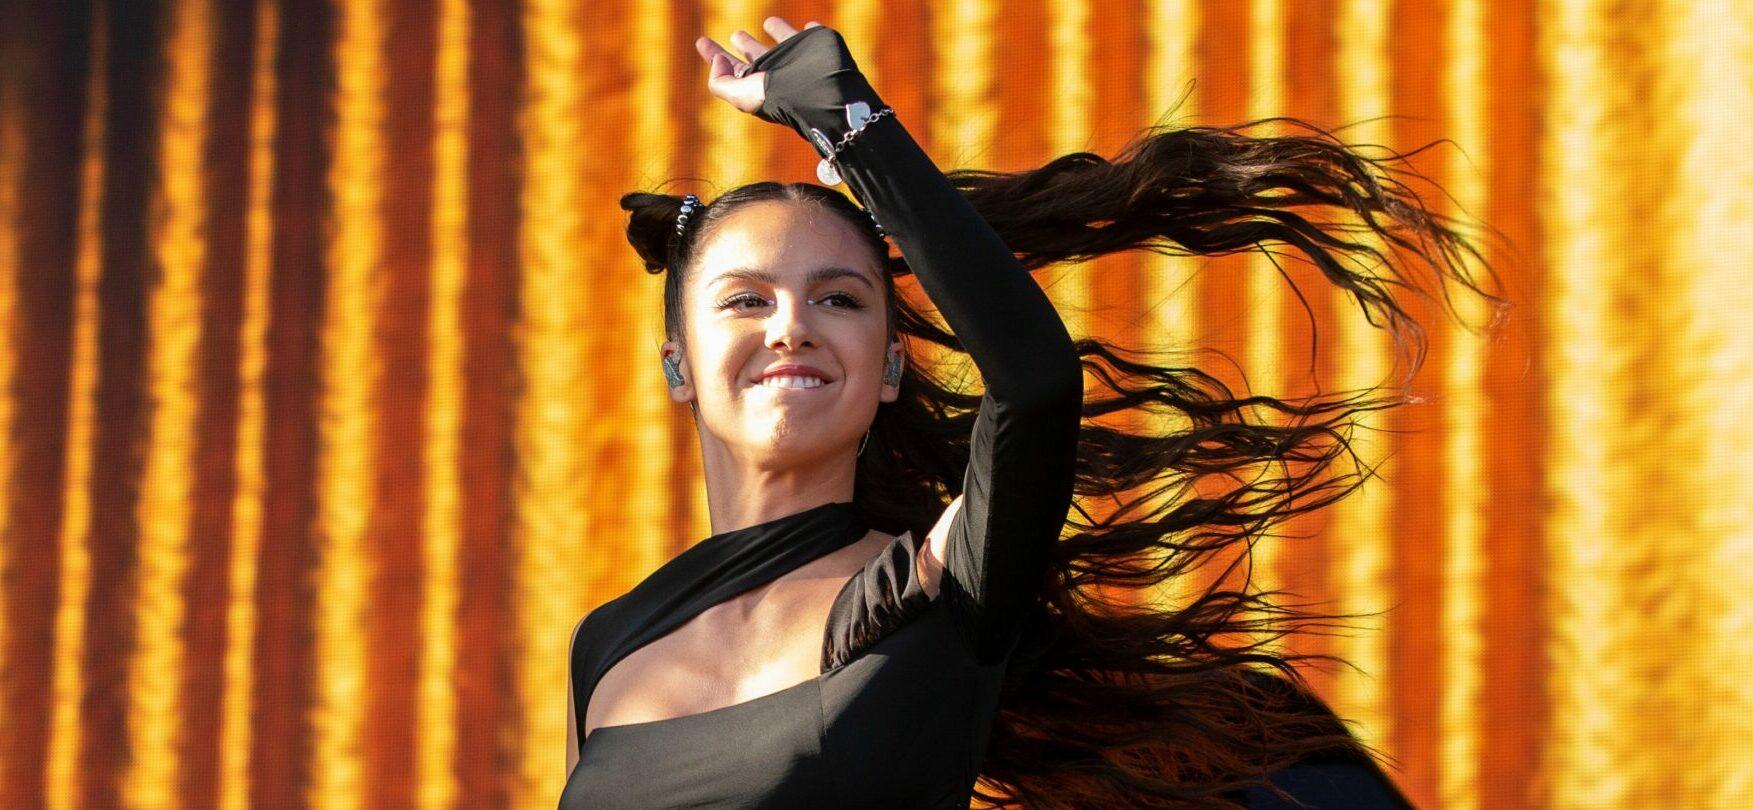 Olivia Rodrigo Signs With New Management As Debut Tour Approaches